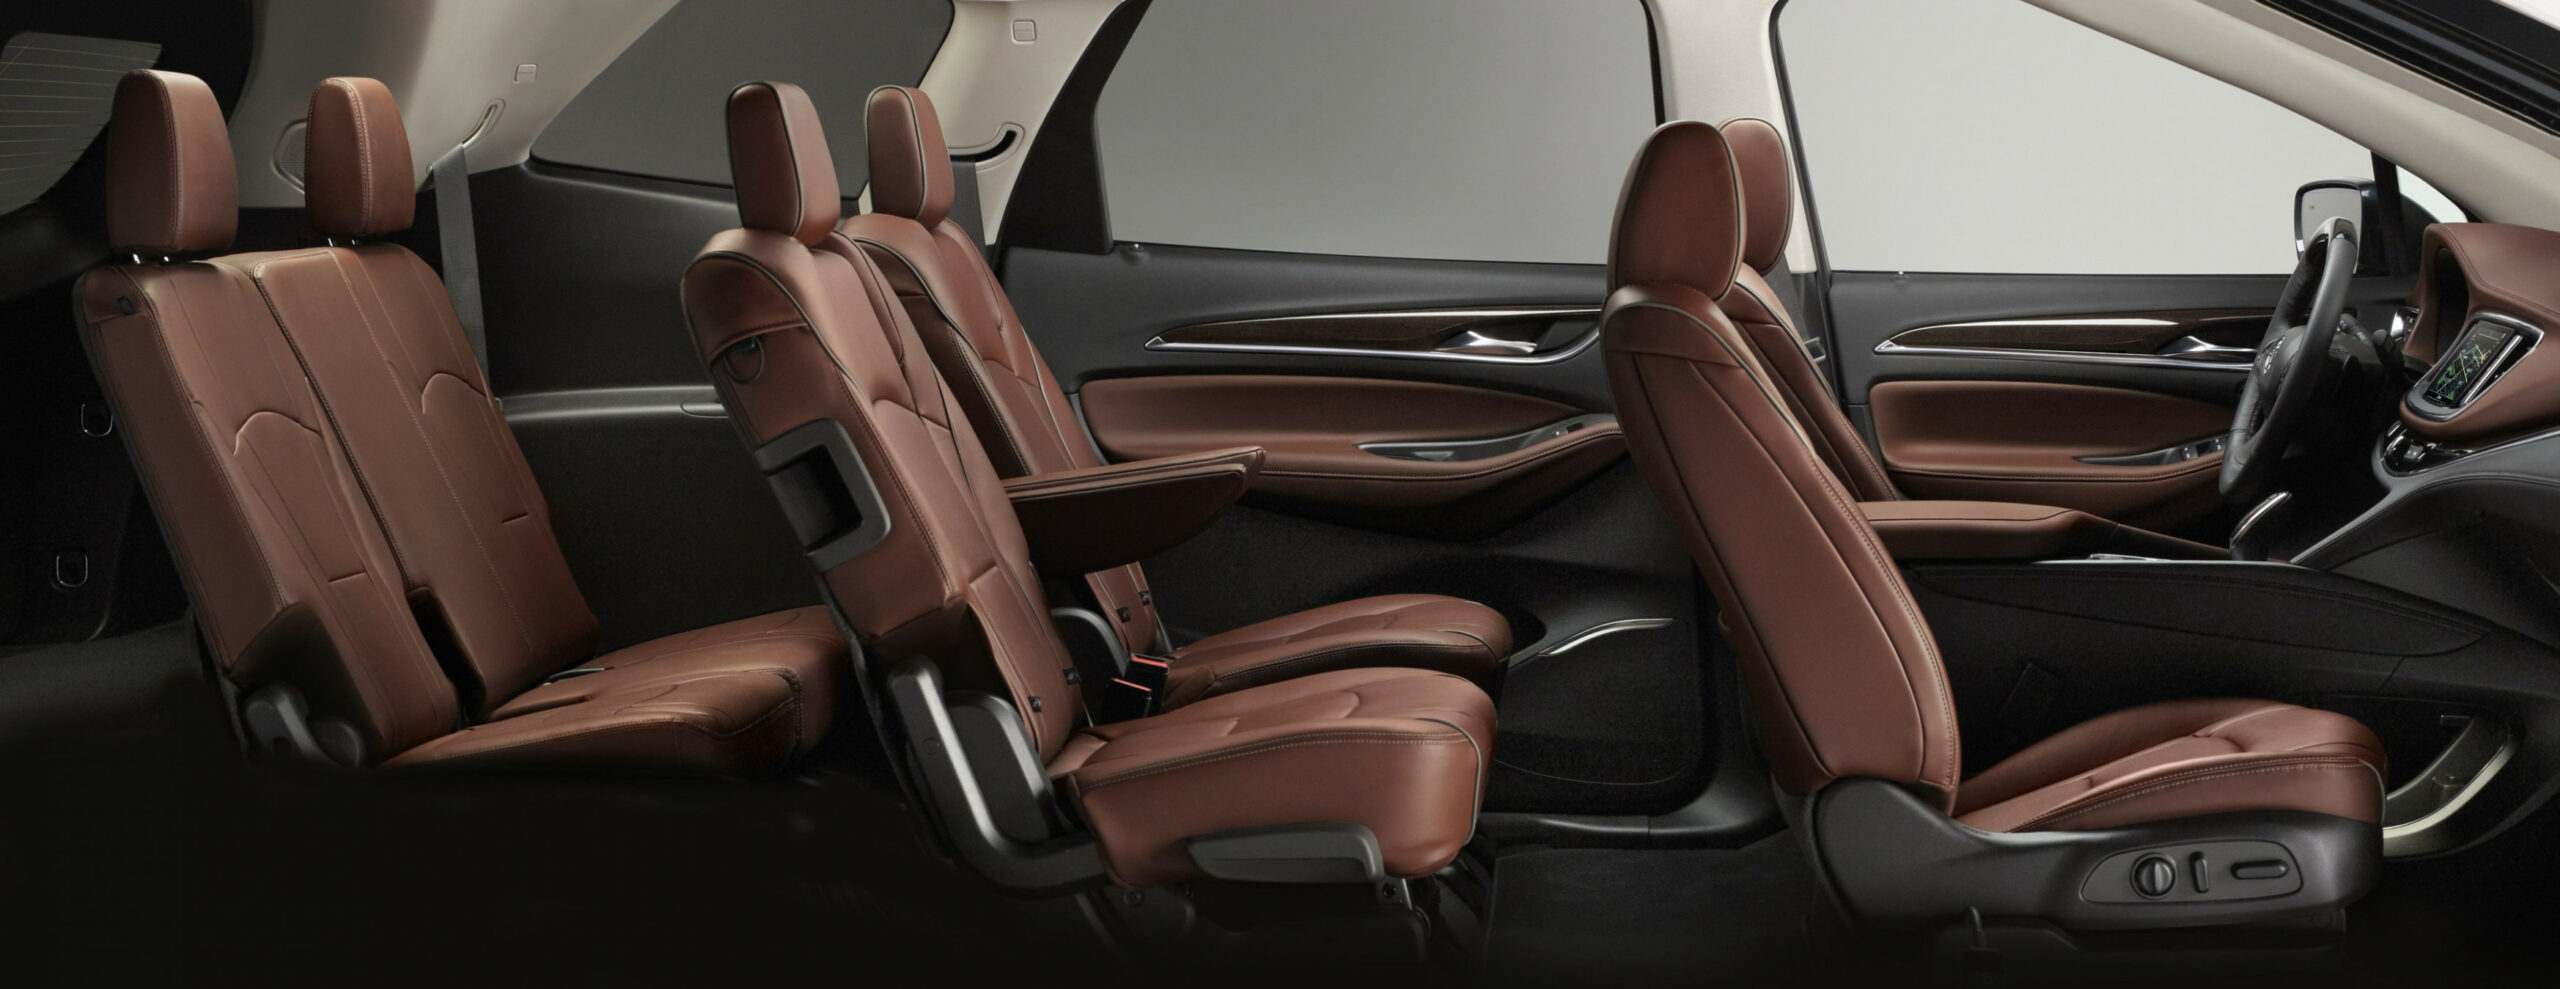 Picture 2023 Buick Enclave Interior